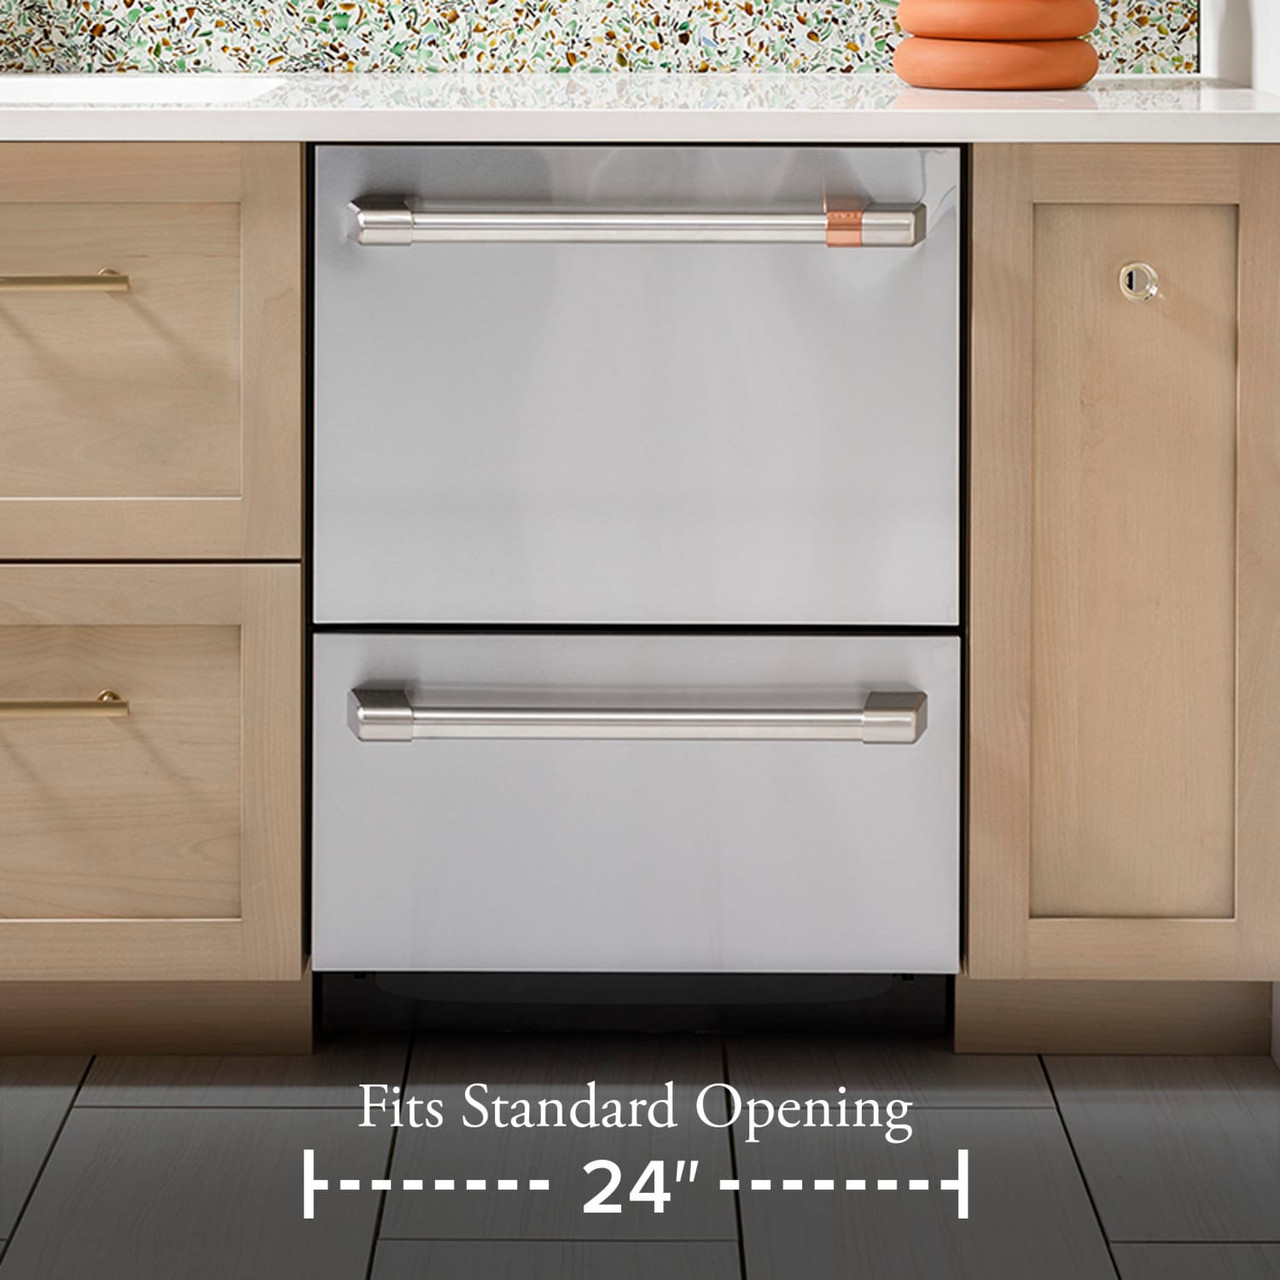 Café - 24” Top Control Built-In Double Drawer Dishwasher - Stainless Steel - CDD420P2TS1